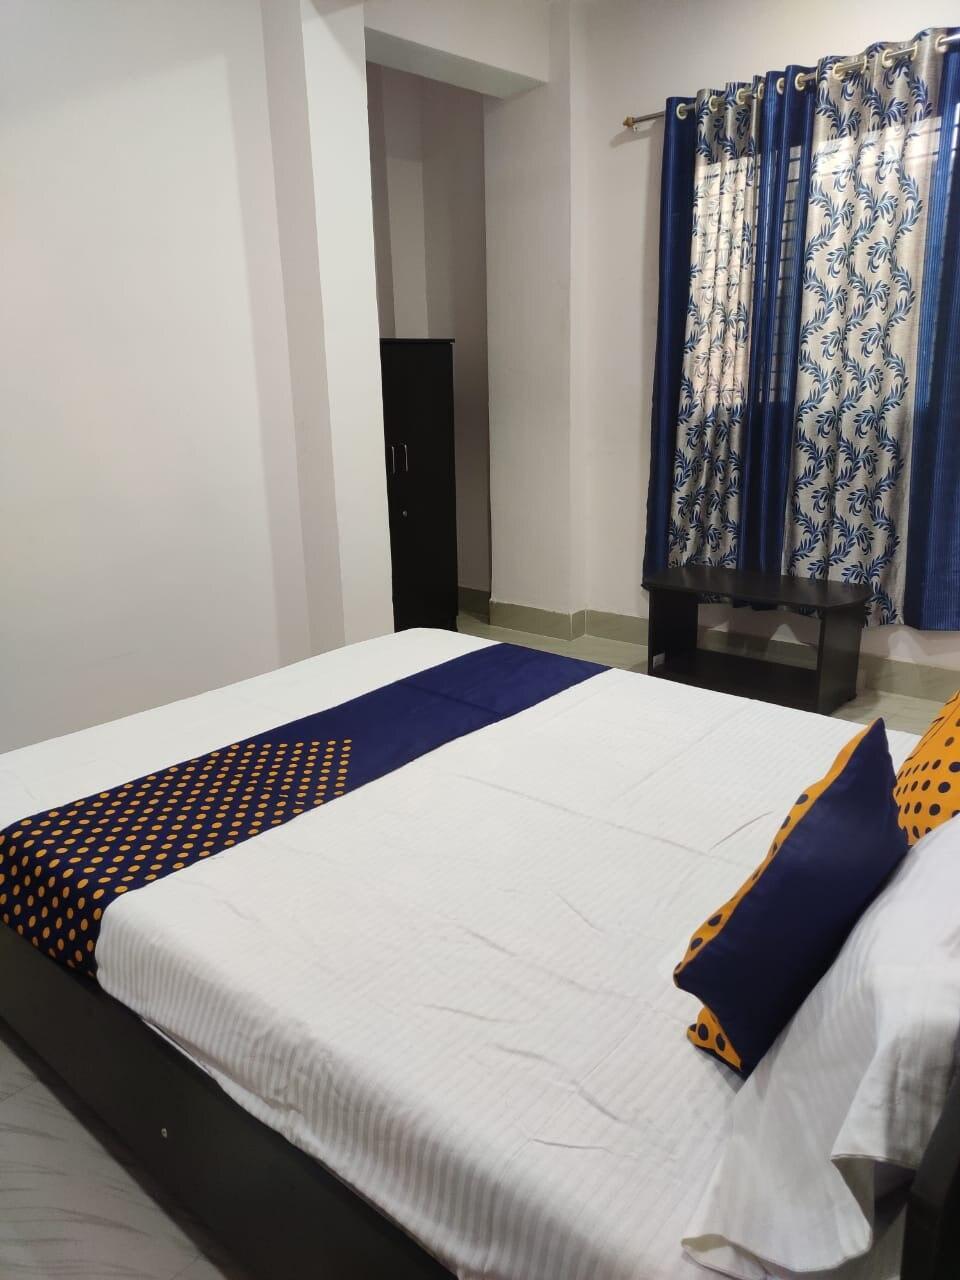 Peaceful And Comfortable Stay At Raison Hotel - Jamshedpur